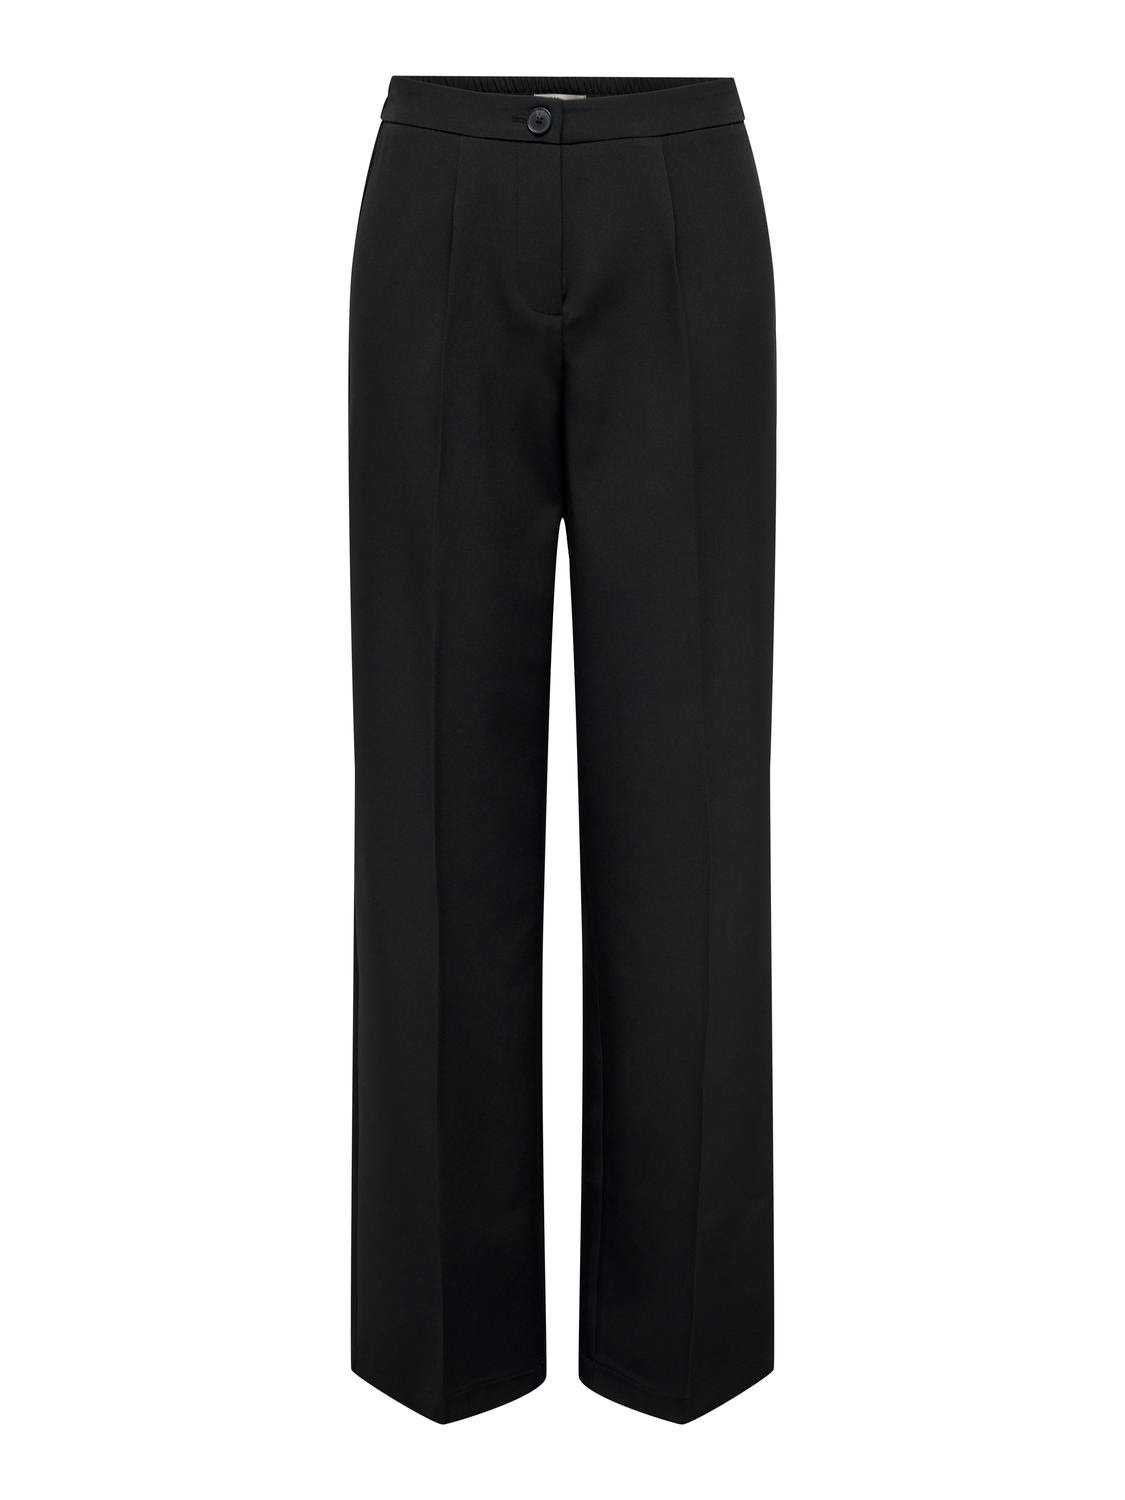 ONLY Loose Fit High waist Trousers -Black - 15288761